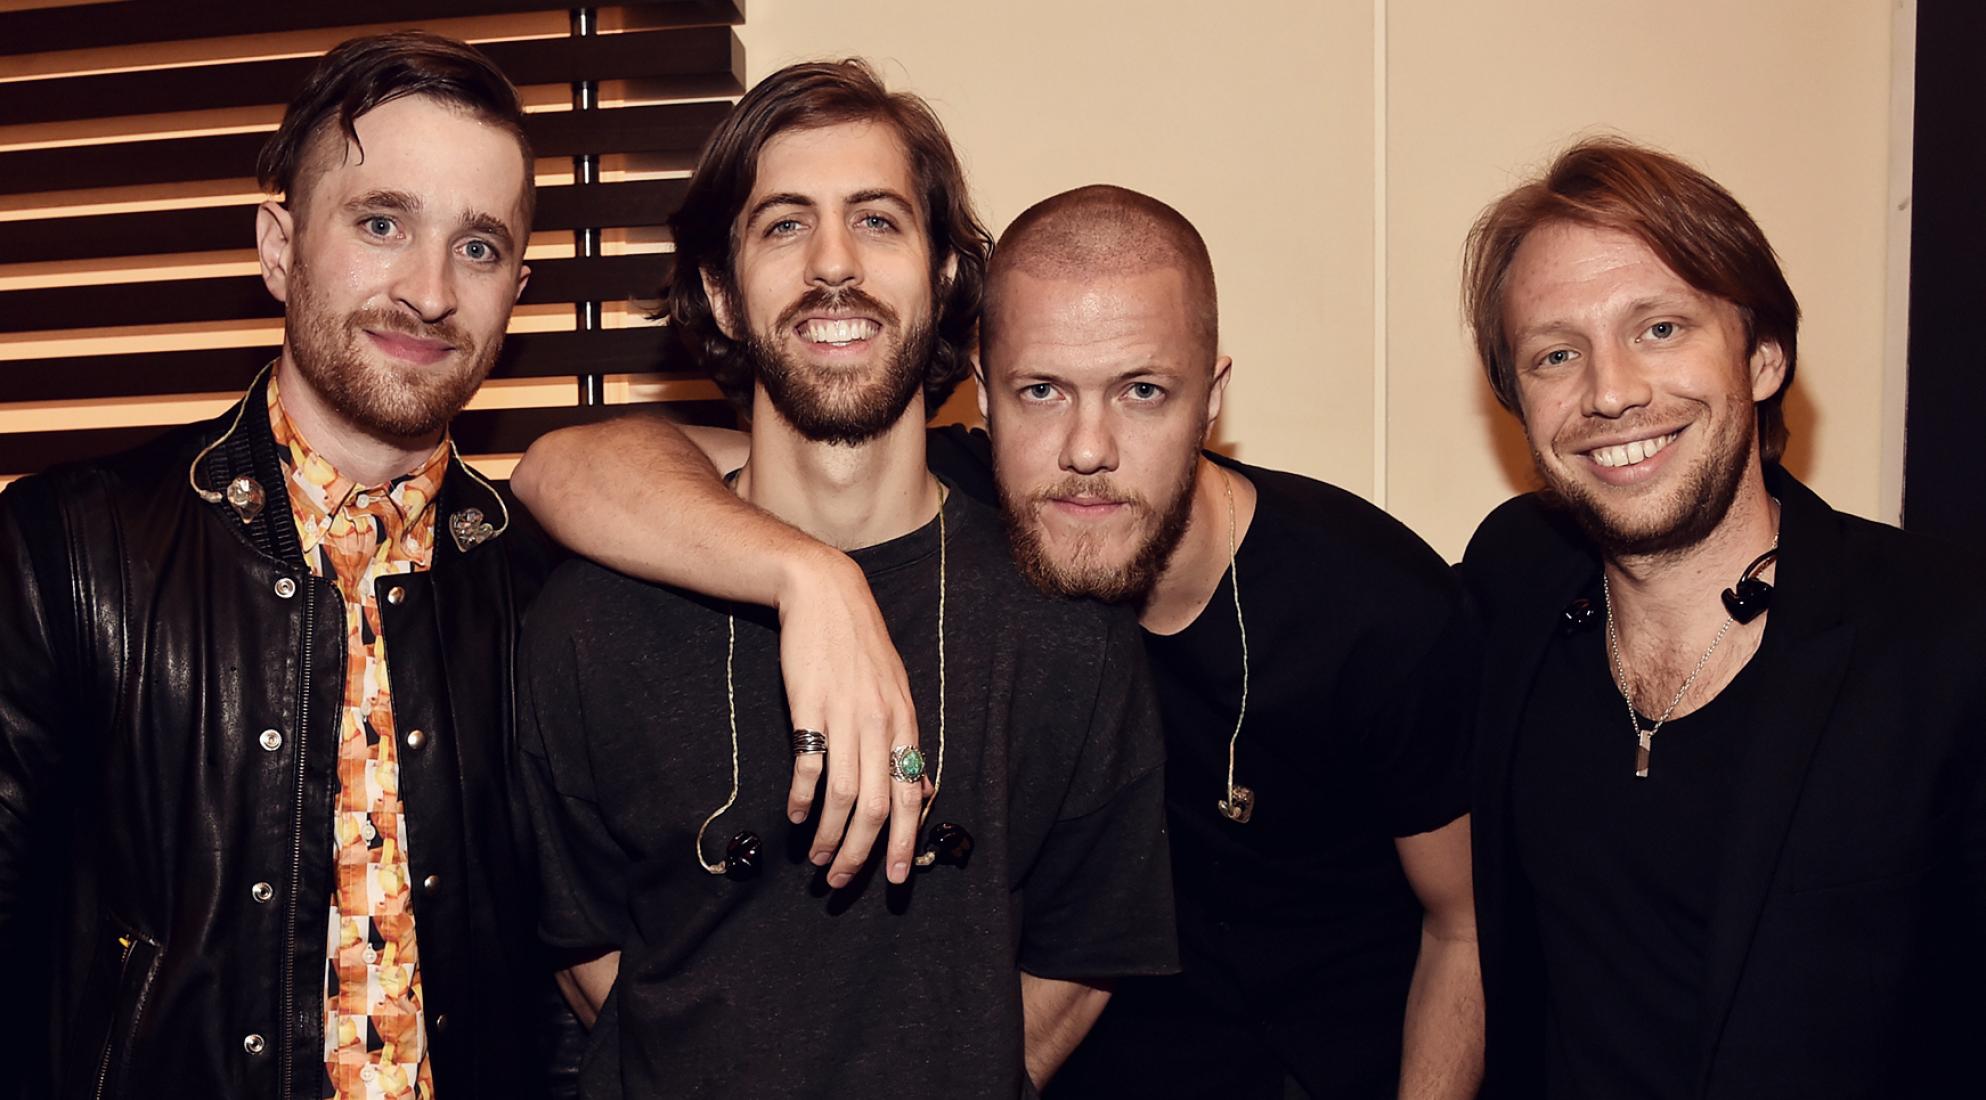 American rock group Imagine Dragons to perform in in September